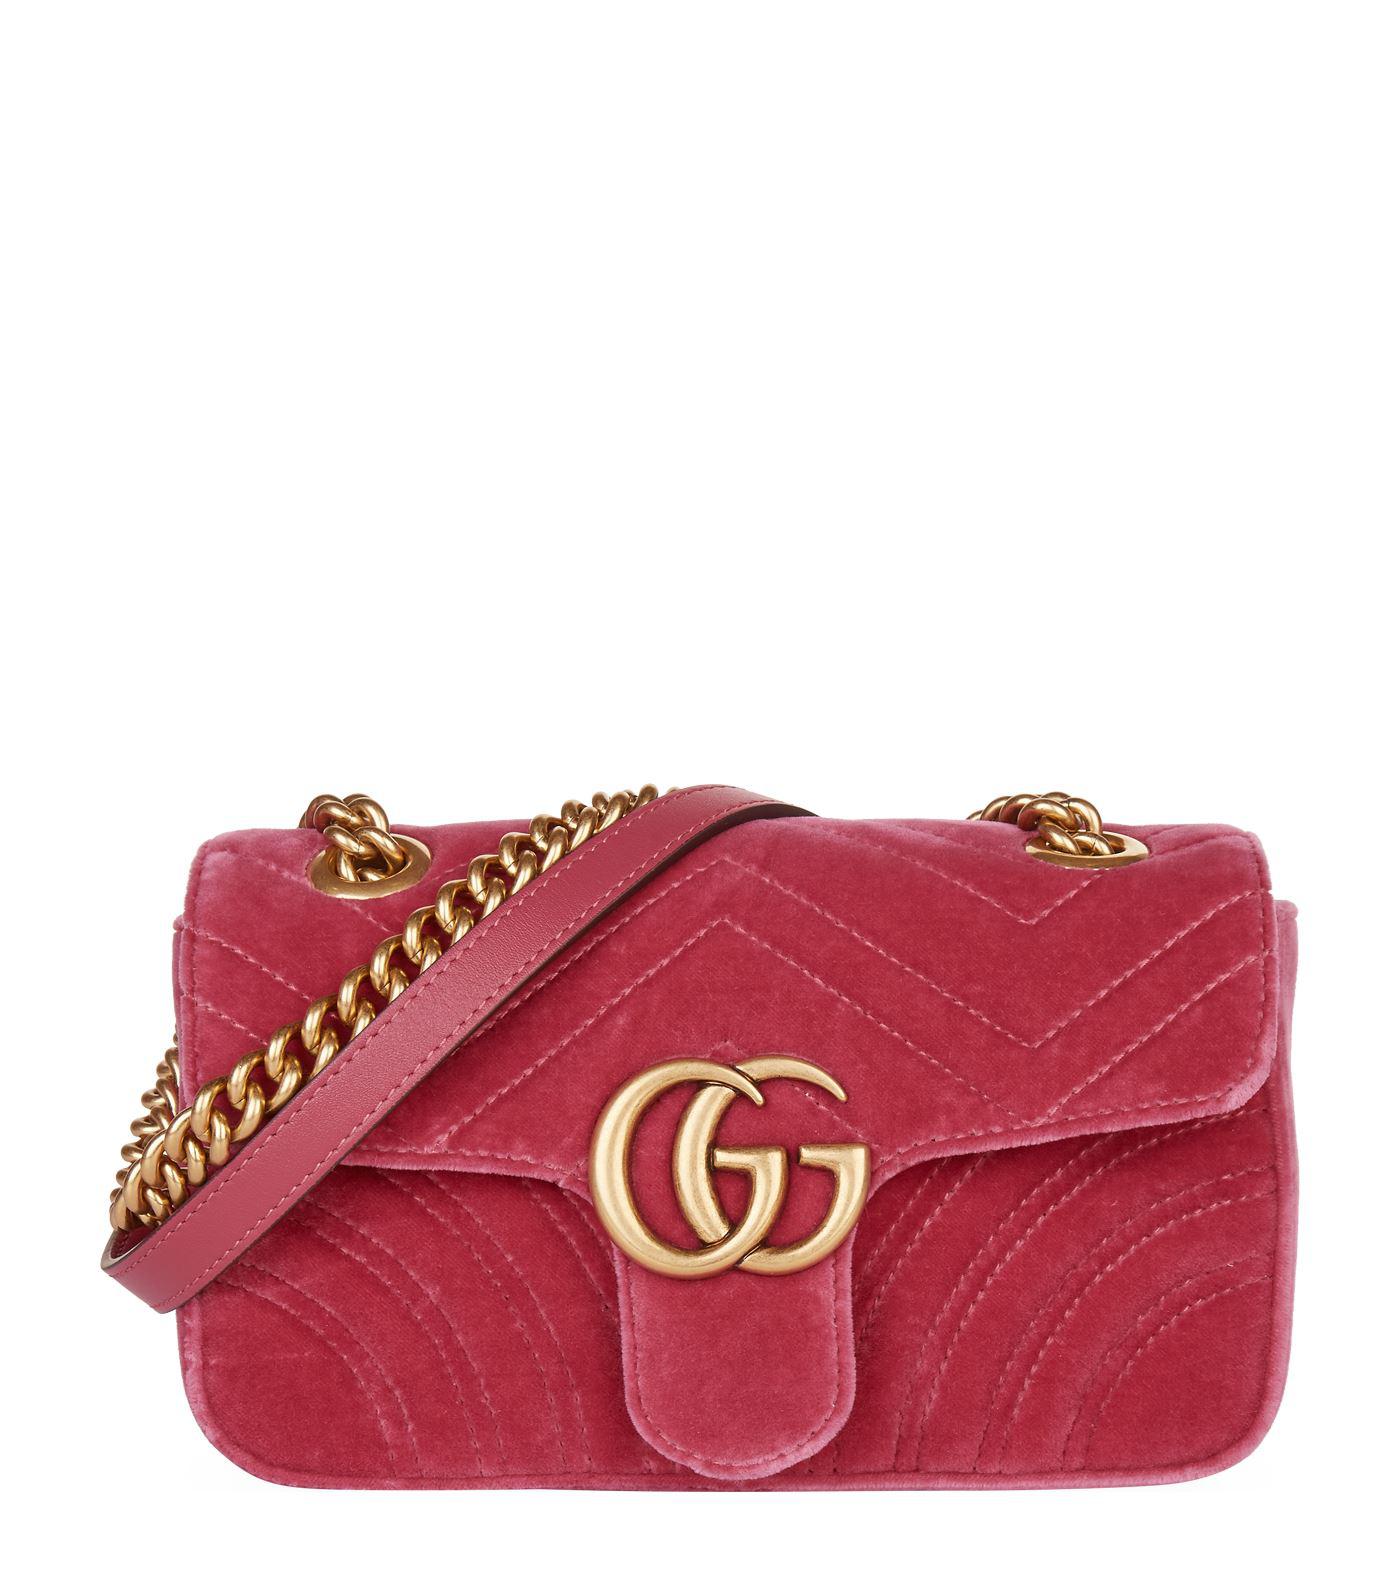 Lyst - Gucci GG Marmont Small Quilted-velvet Cross-body Bag in Pink